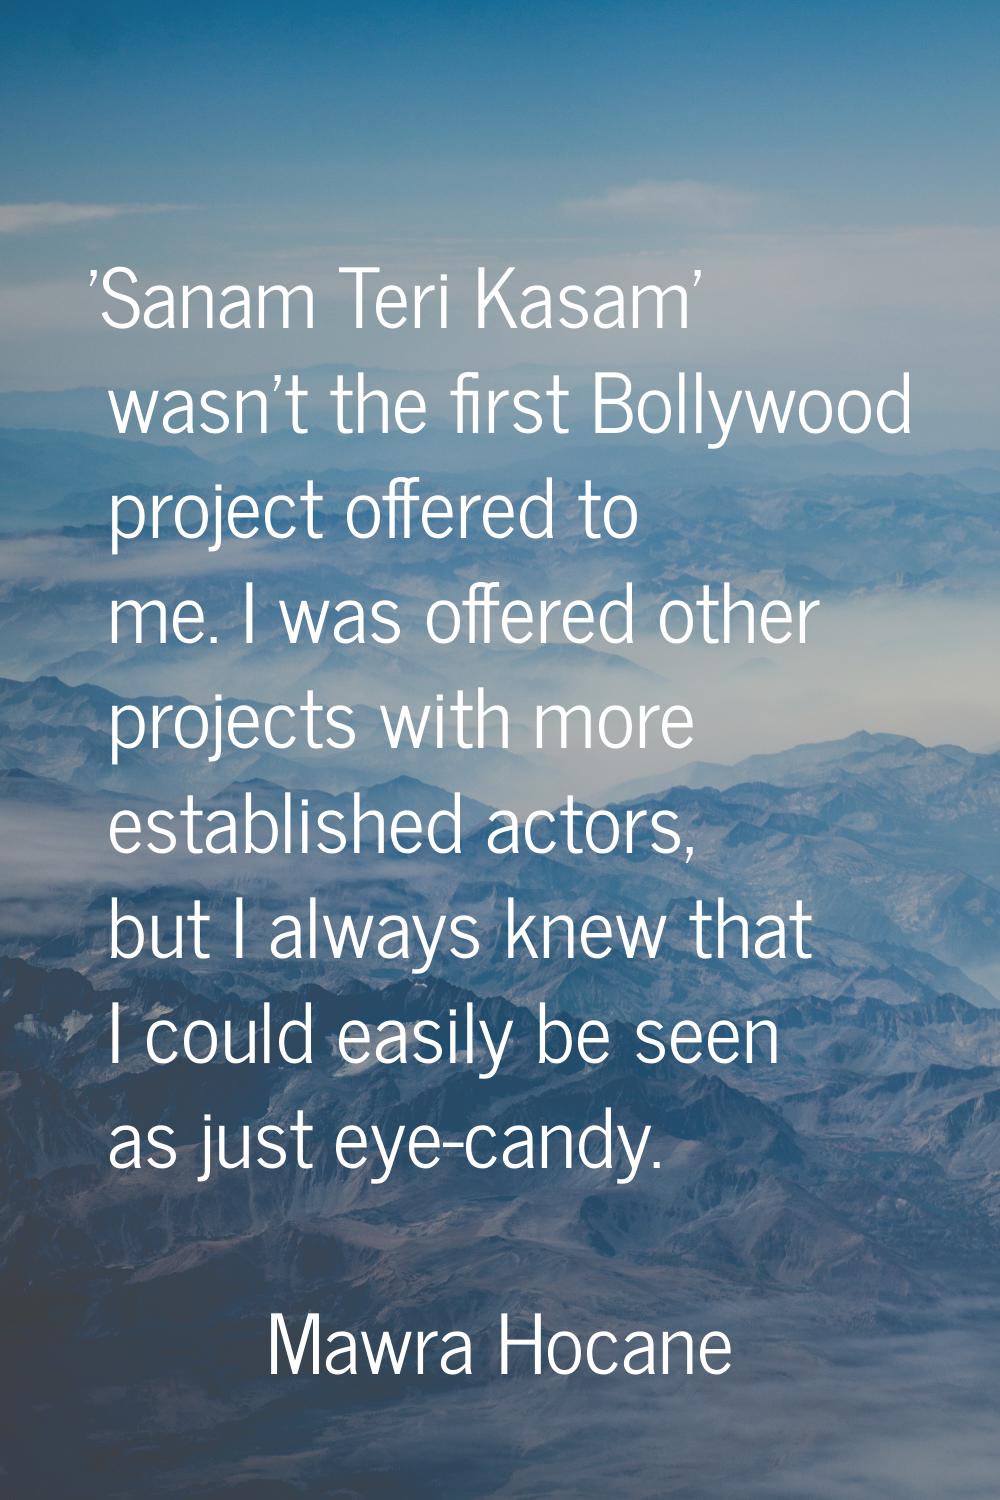 'Sanam Teri Kasam' wasn't the first Bollywood project offered to me. I was offered other projects w